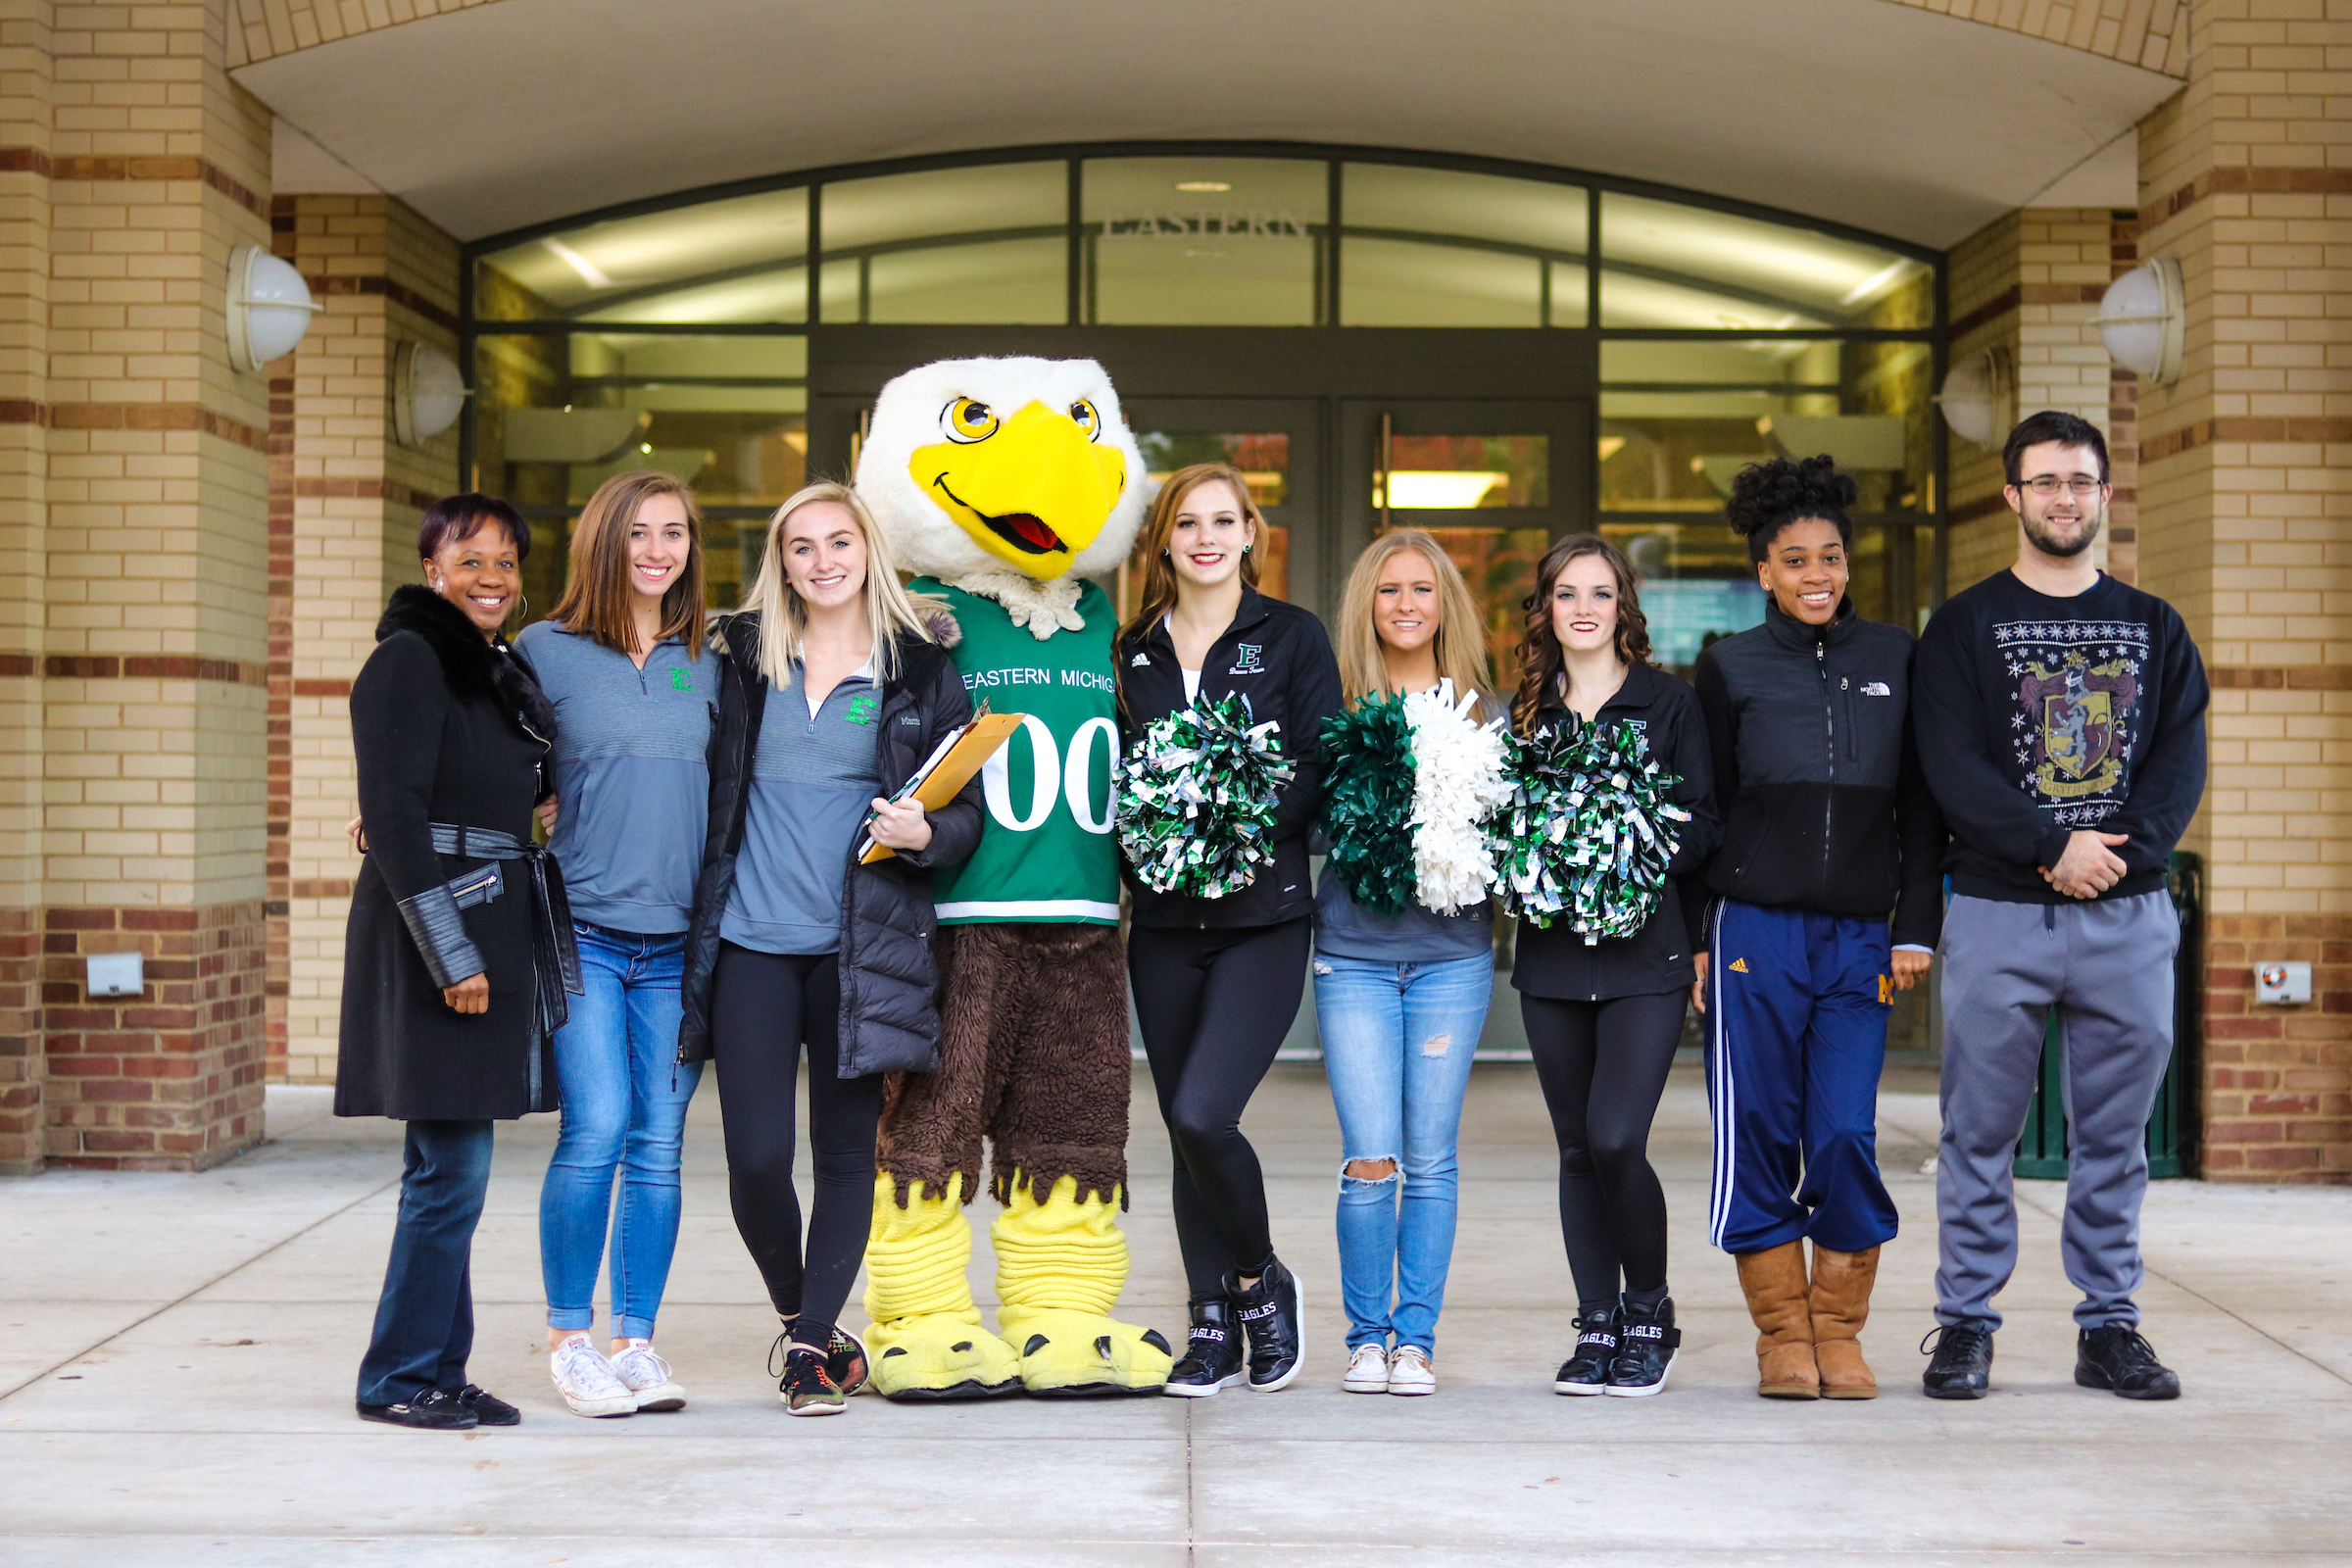 A photo of PR students standing with the EMU mascot, Swoop.